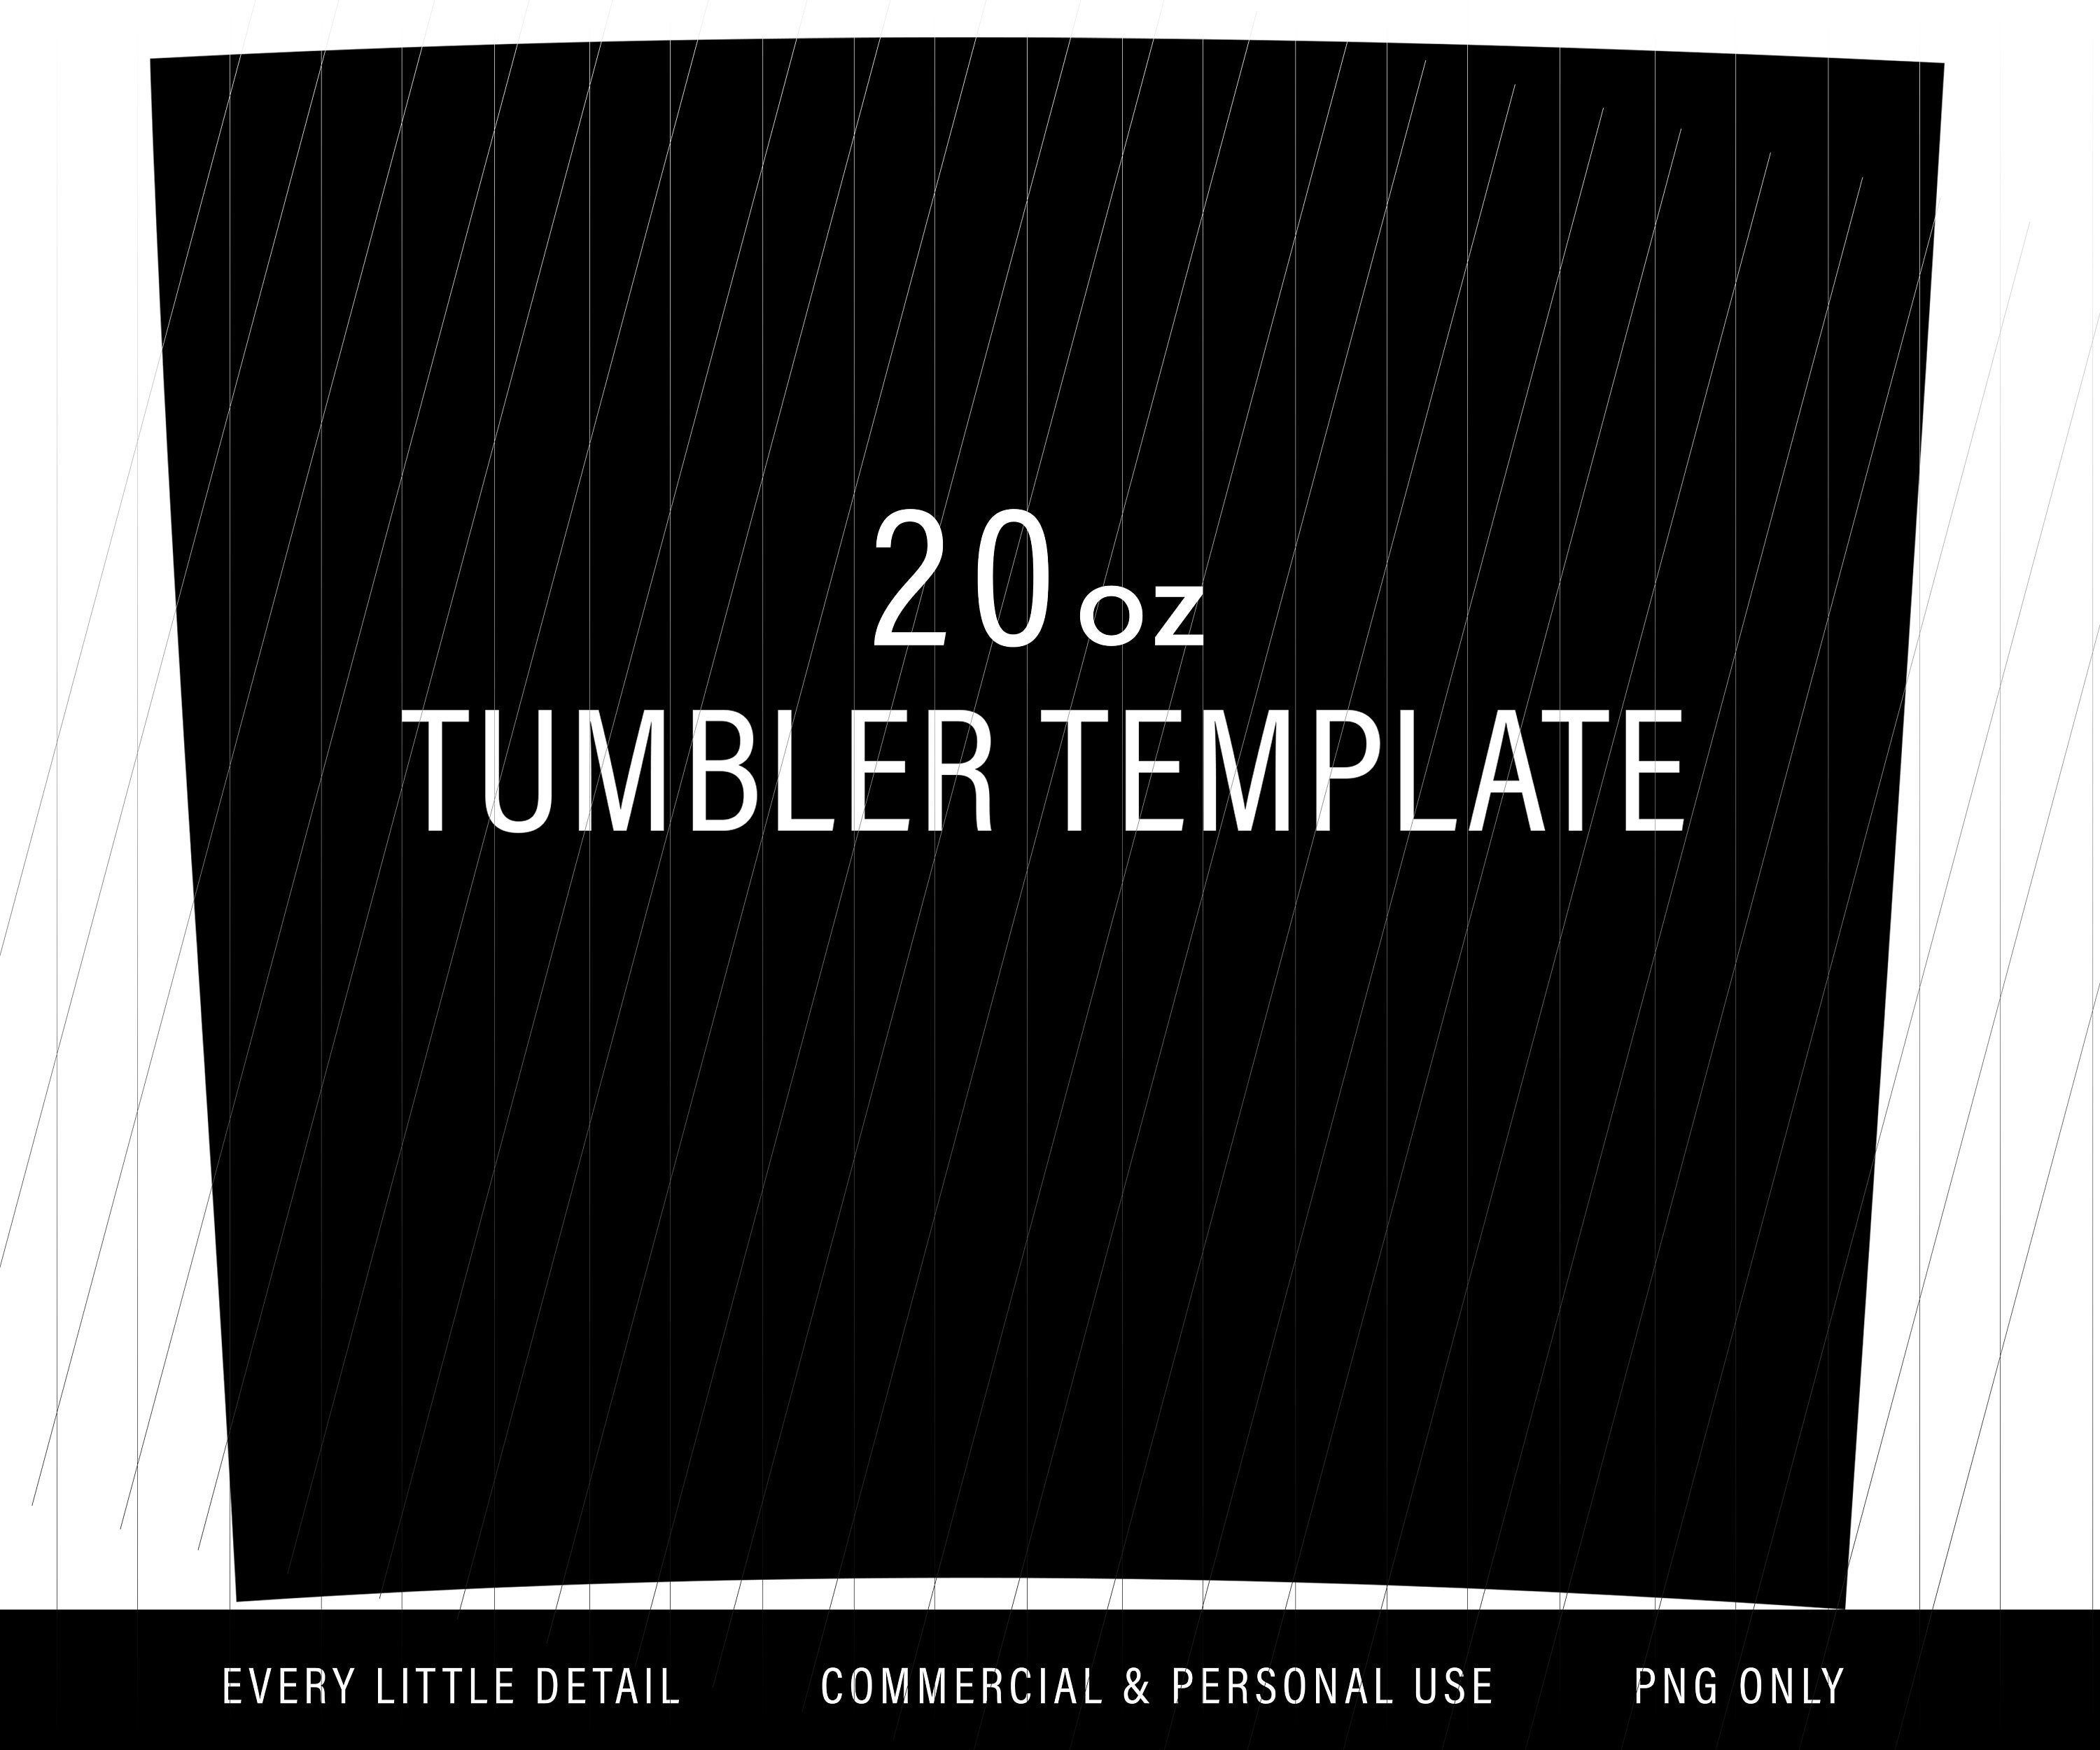 Tapered Tumbler Template Free